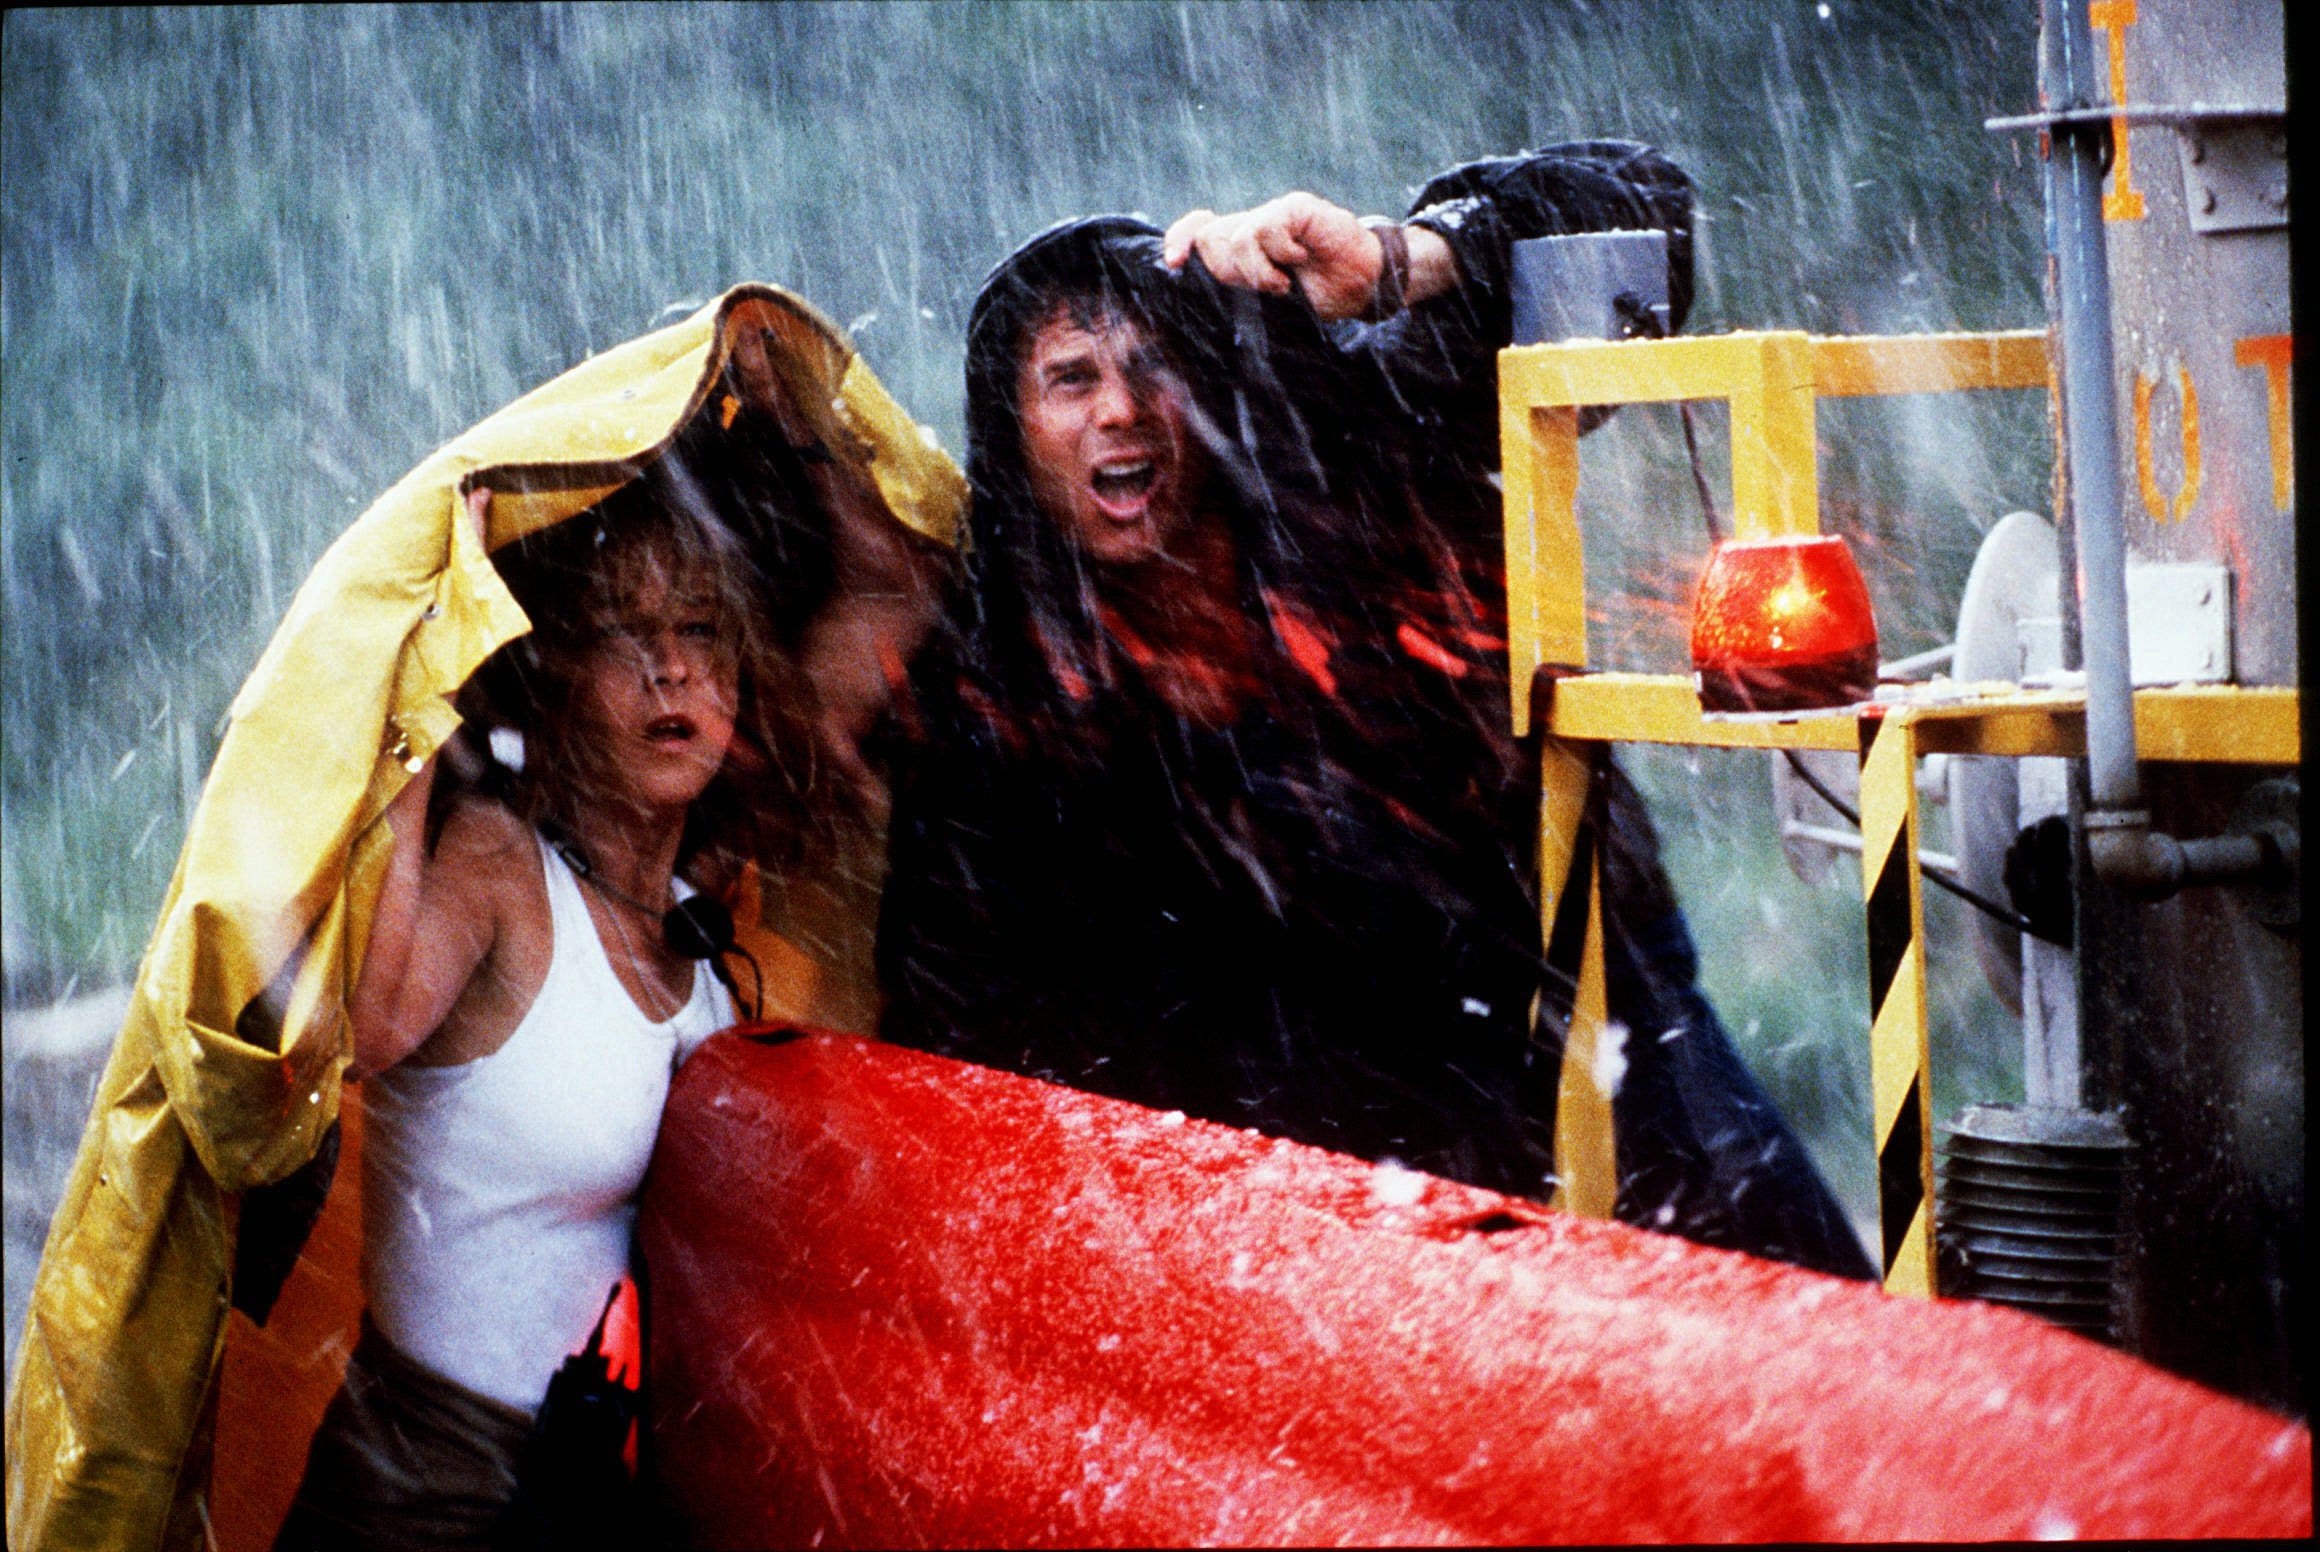 The 20 best disaster movies of all time, from 'Twister' to 'Titanic'